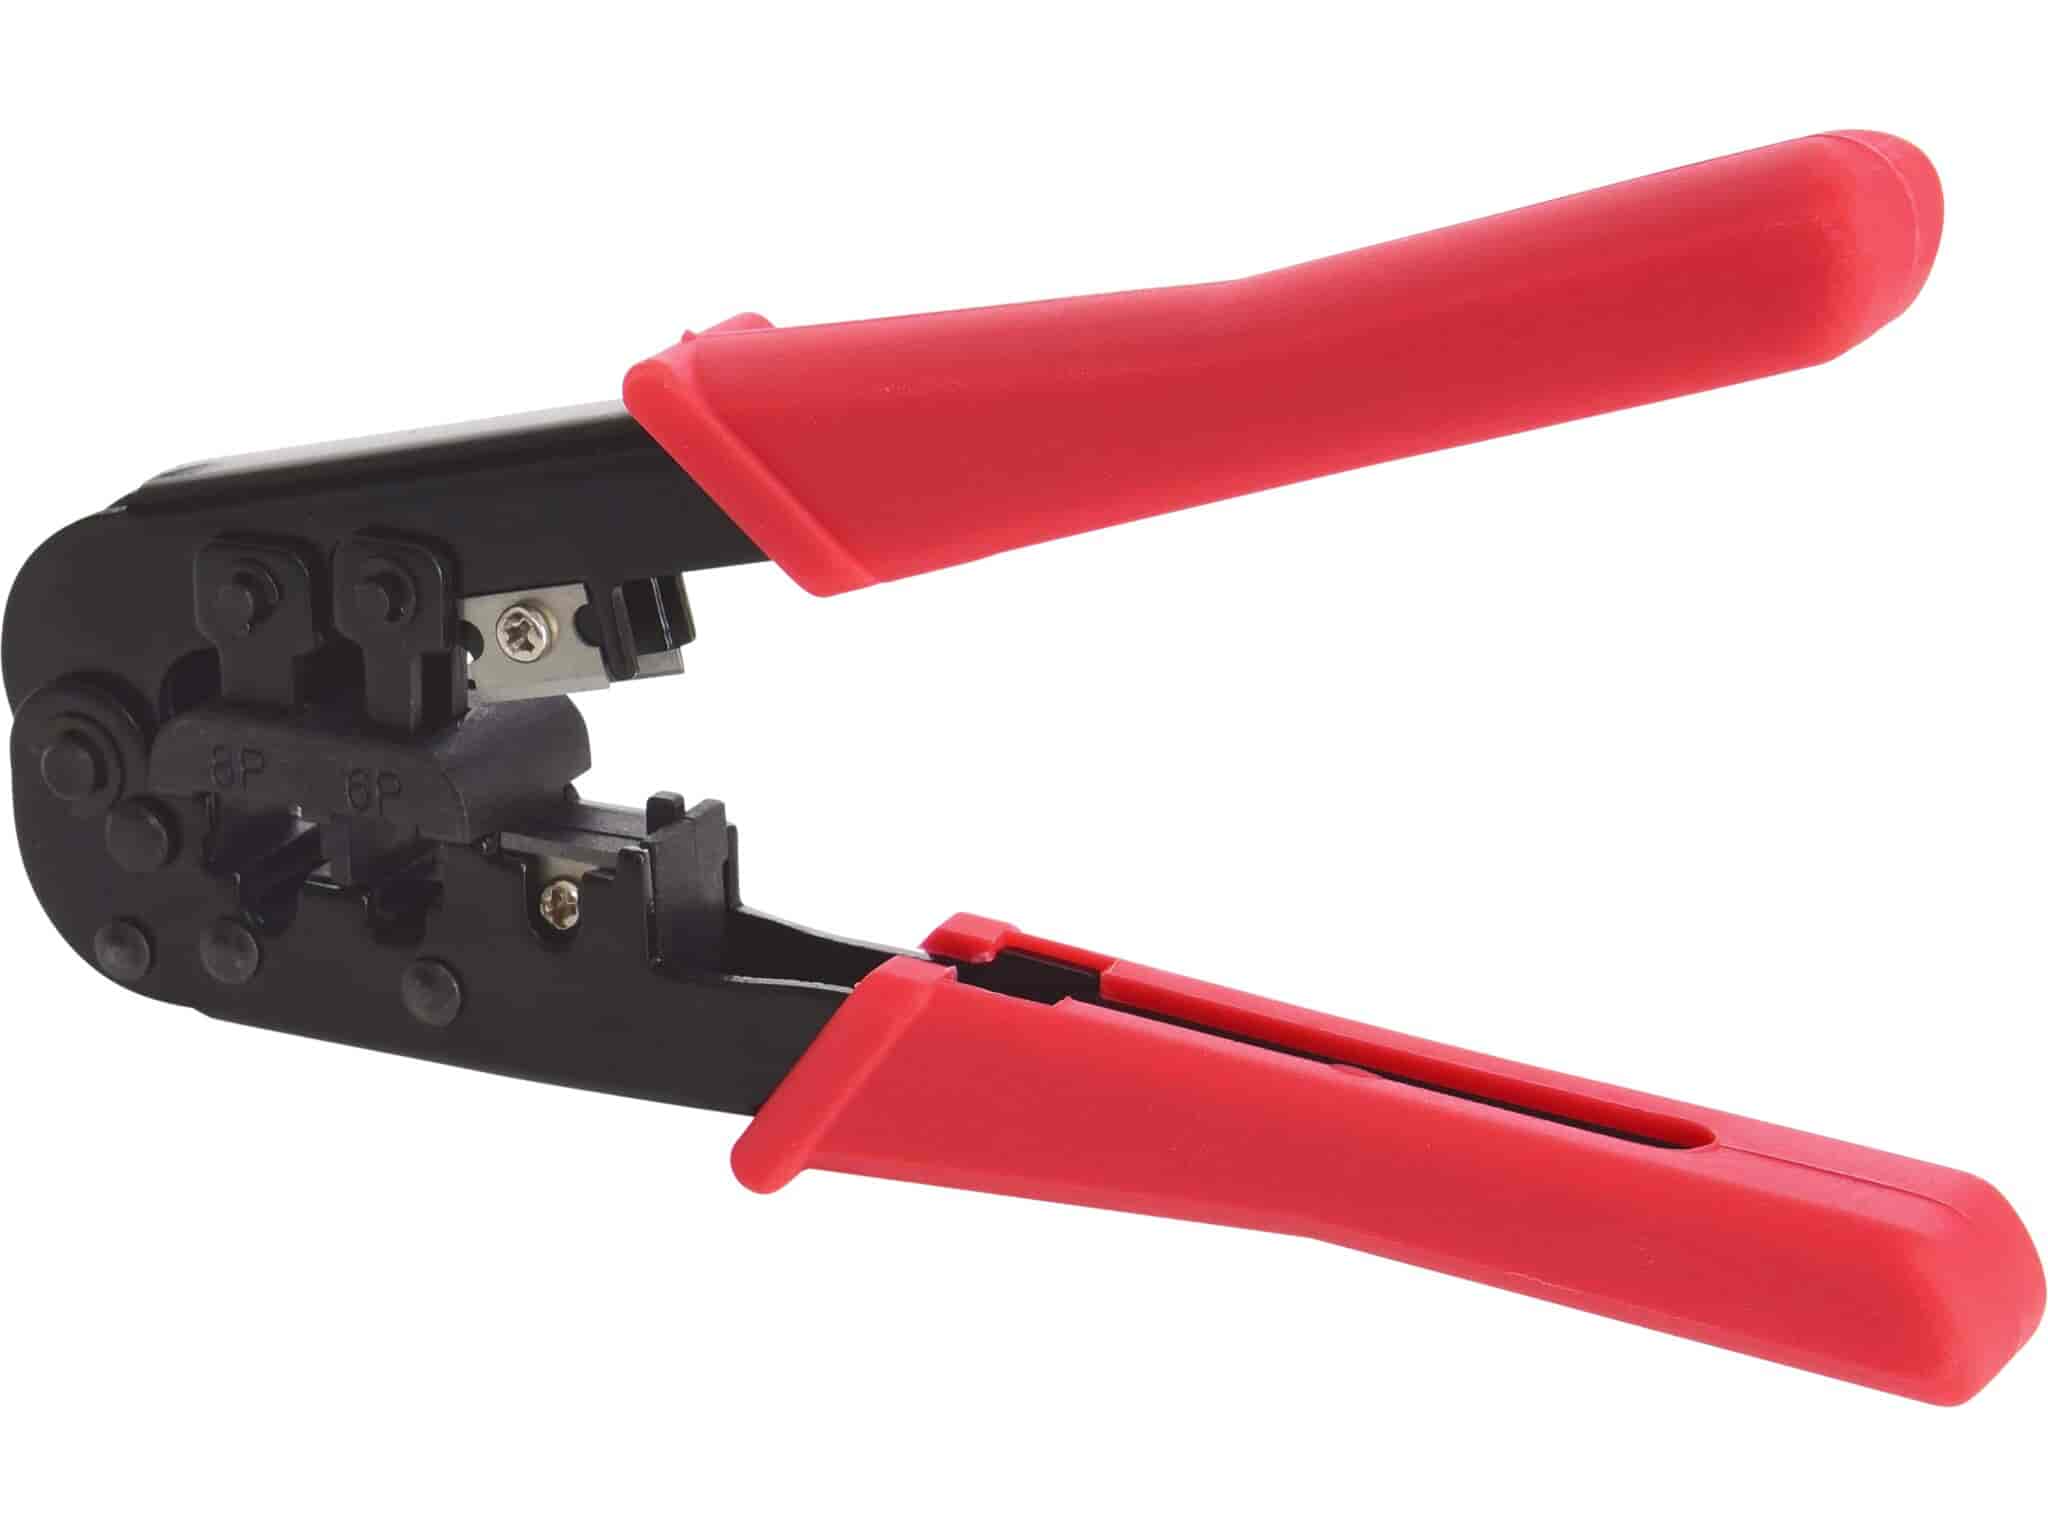 Crimp tool RJ45. For LAN/Network/Patch cable plugs.